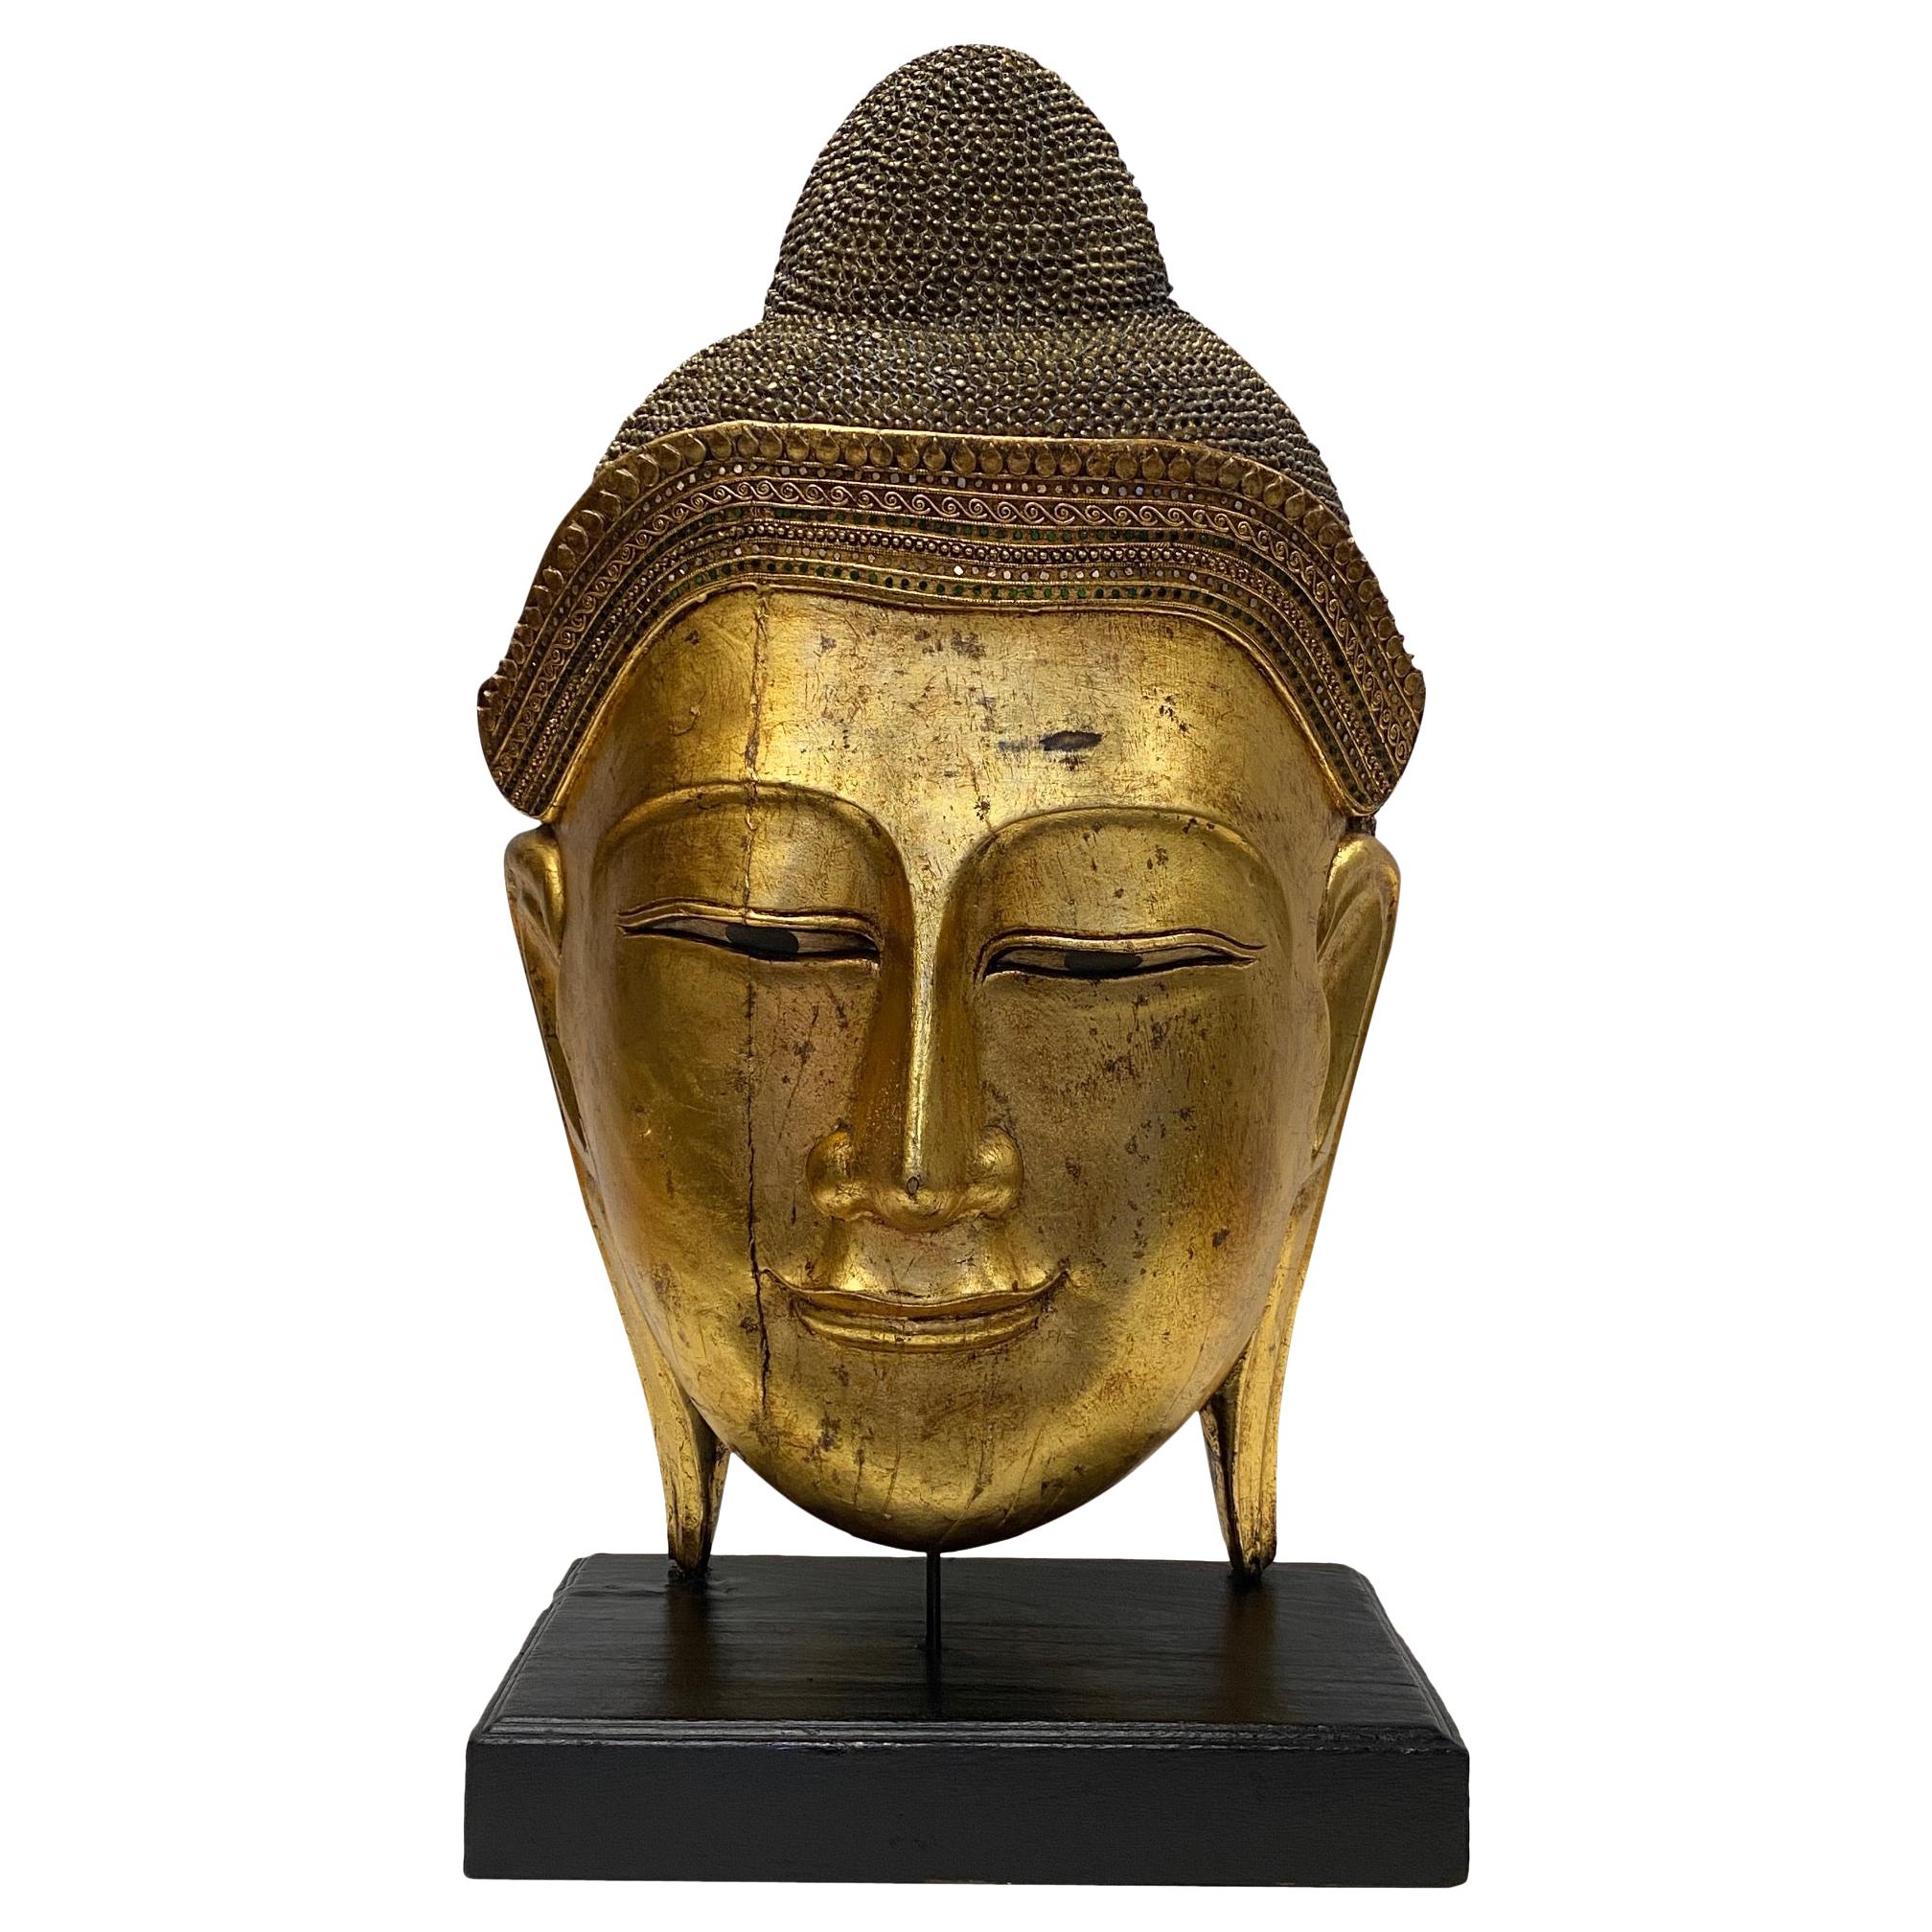 Magnificent Monumentally Large Carved Gilded Thai Buddha Head